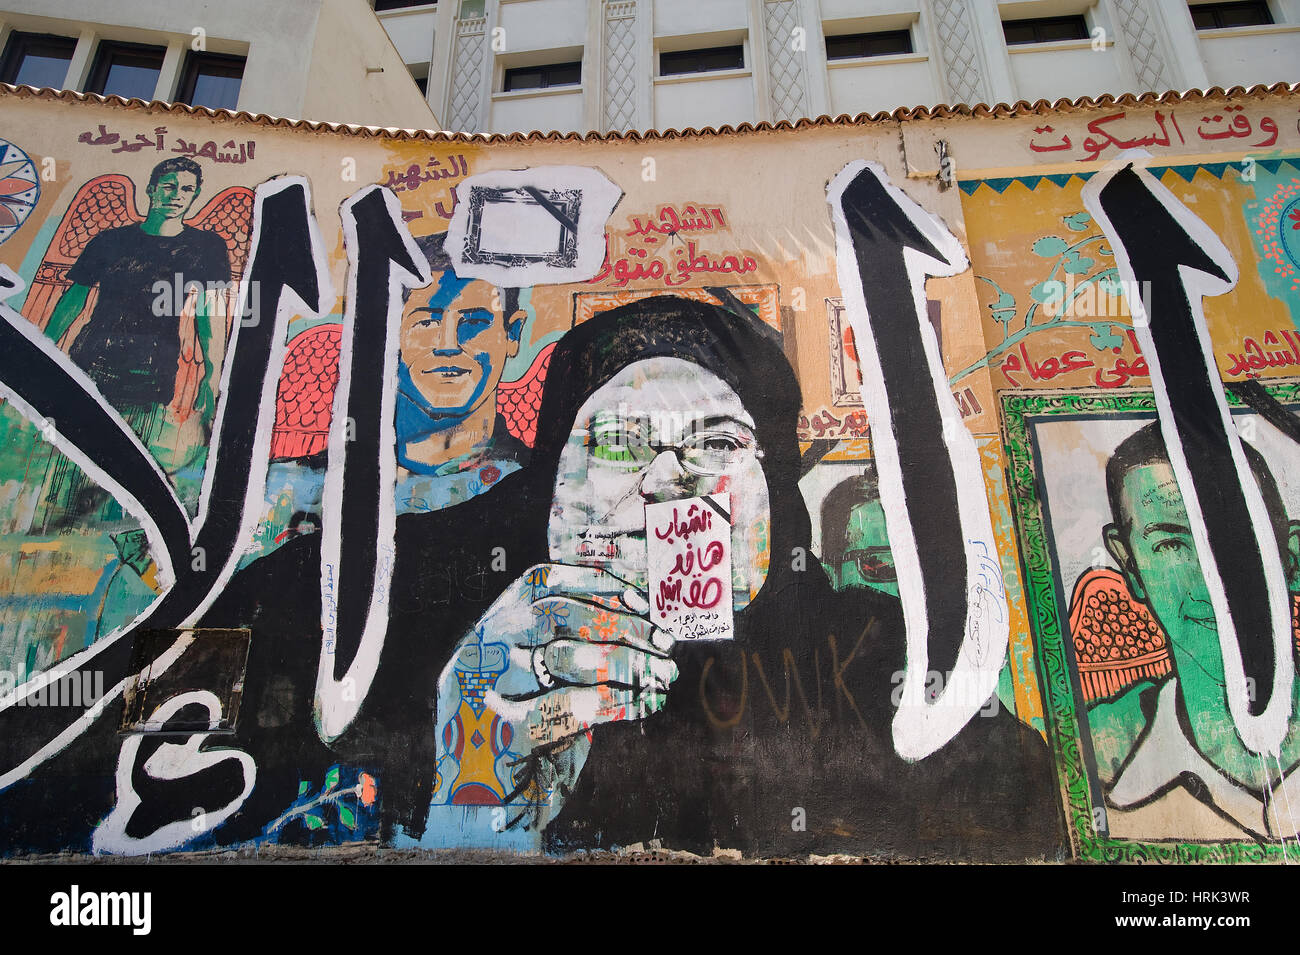 EGYPT, CAIRO: People conquer the streets and public space in general, more and more graffitis and murals appear. Stock Photo